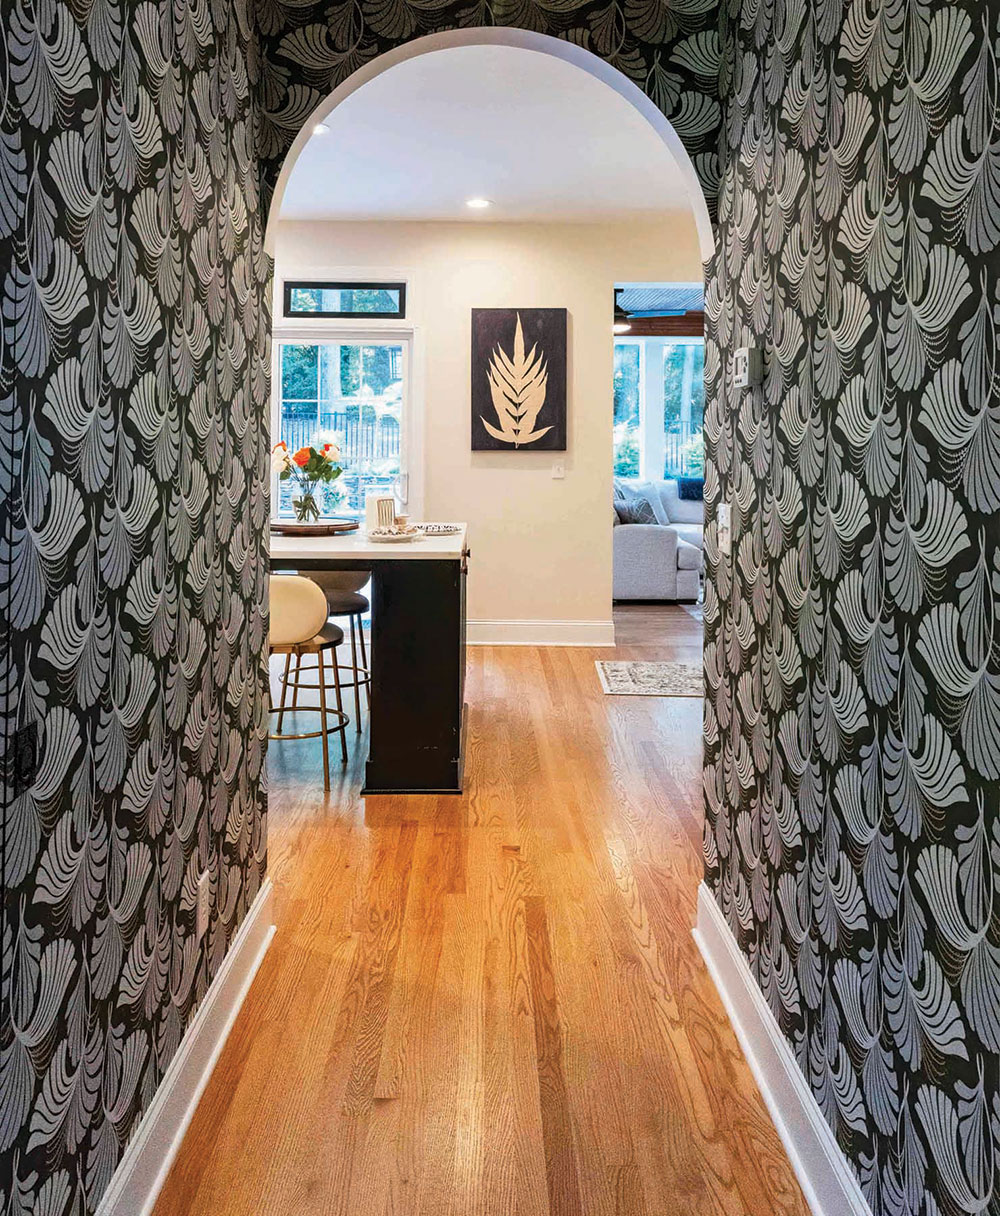 Bold patterned wallpaper disguises doors to a hidden pantry.